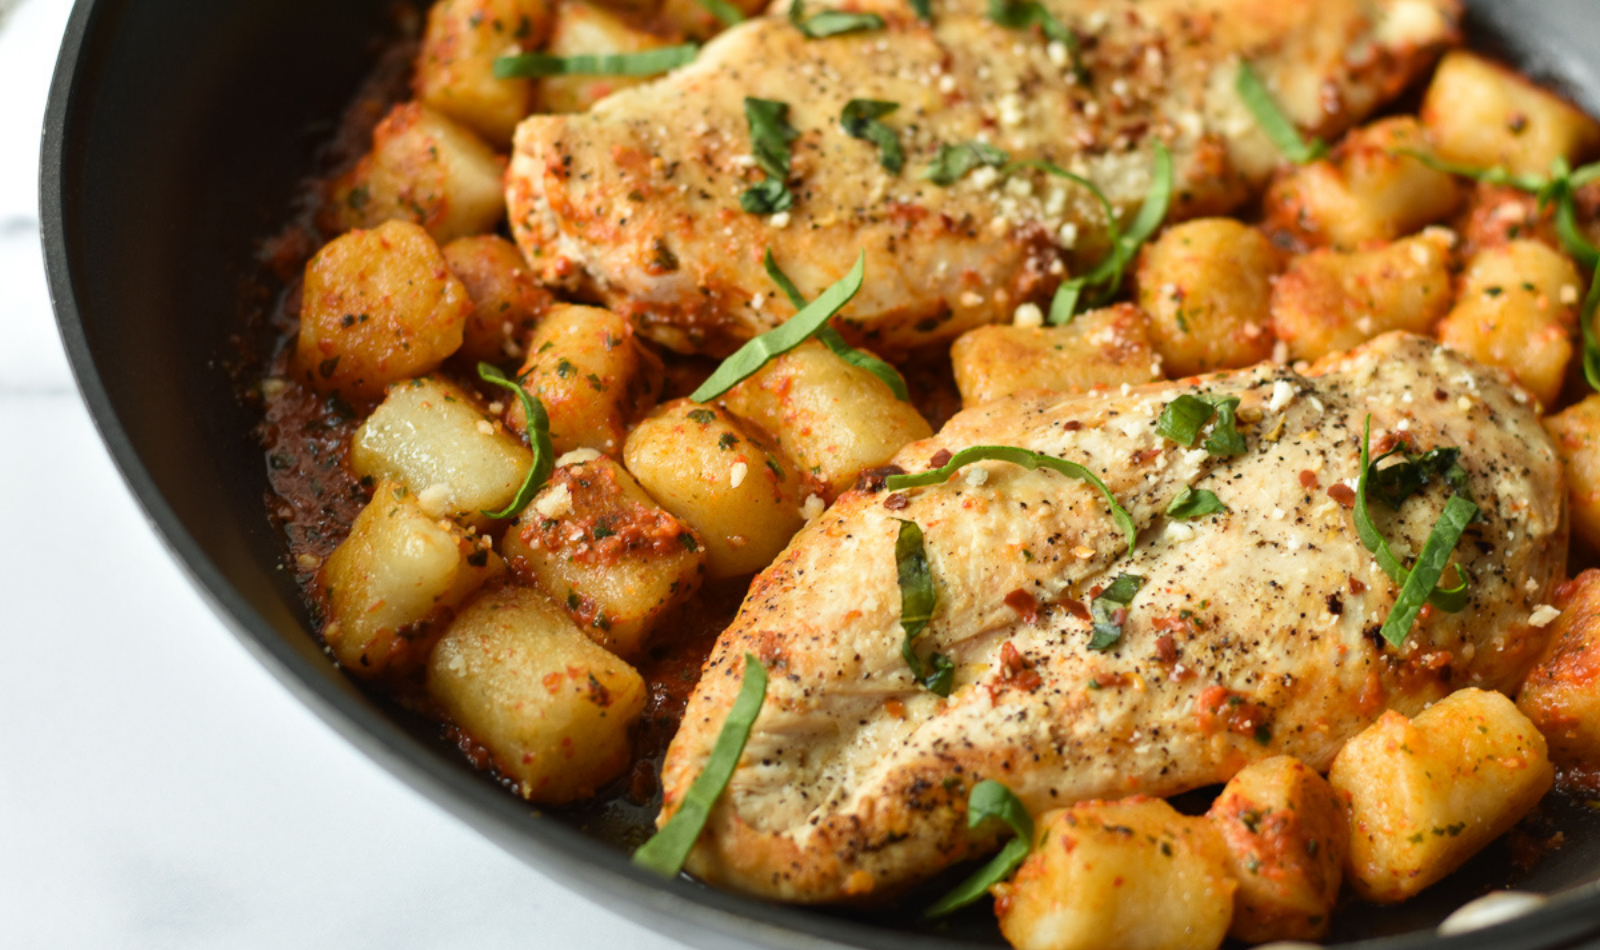 Blog Featured Image - Cauliflower Gnocchi with Chicken and Roasted Red Pepper Pesto